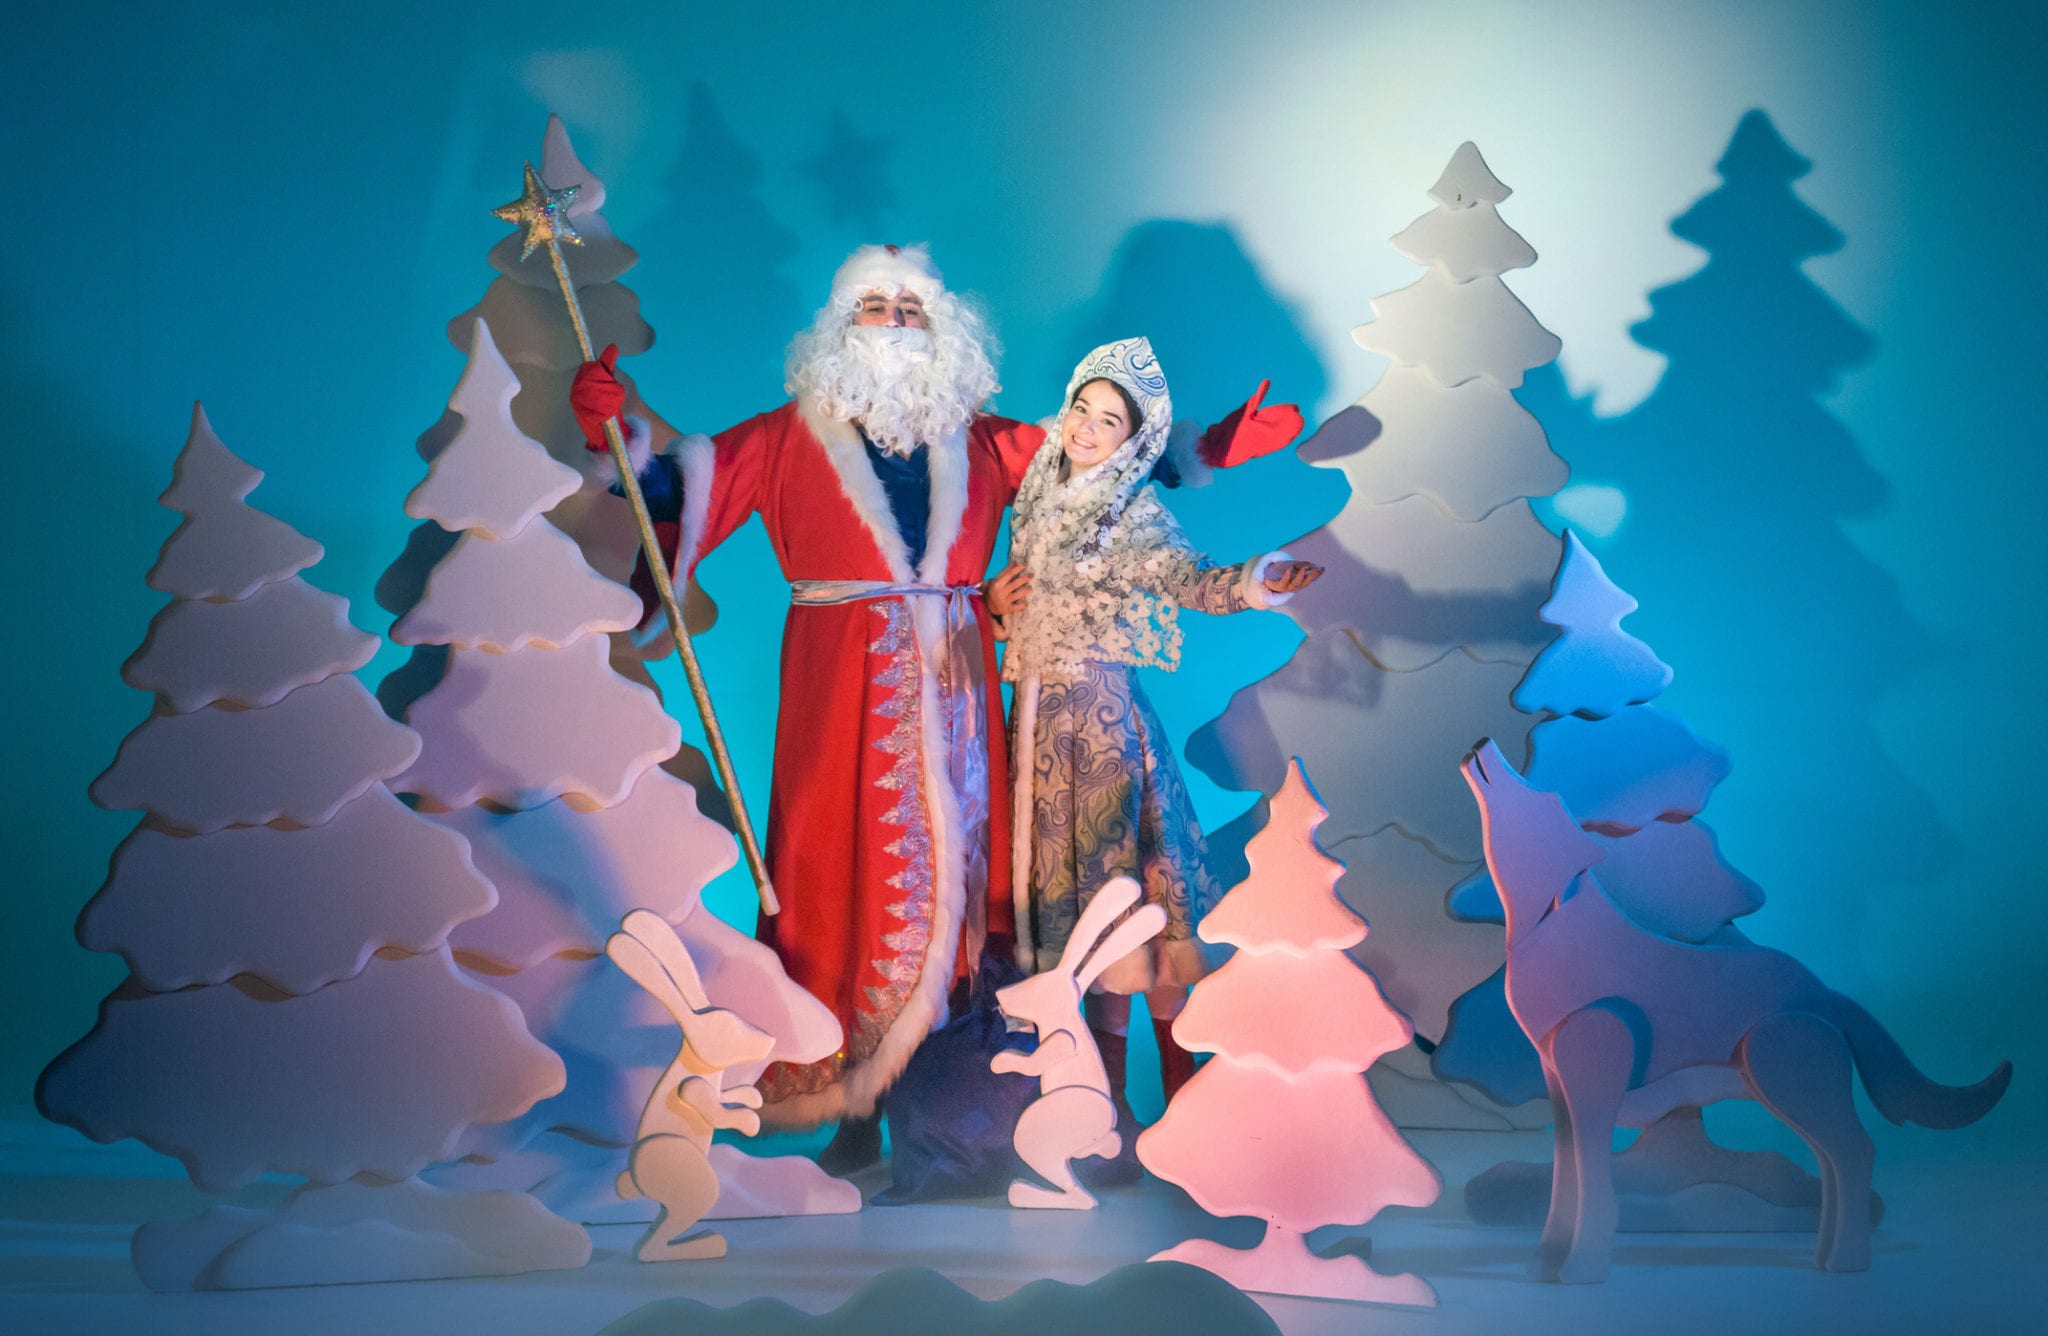 Santa and Snow Maiden in Myrtle Beach Christmas Shows